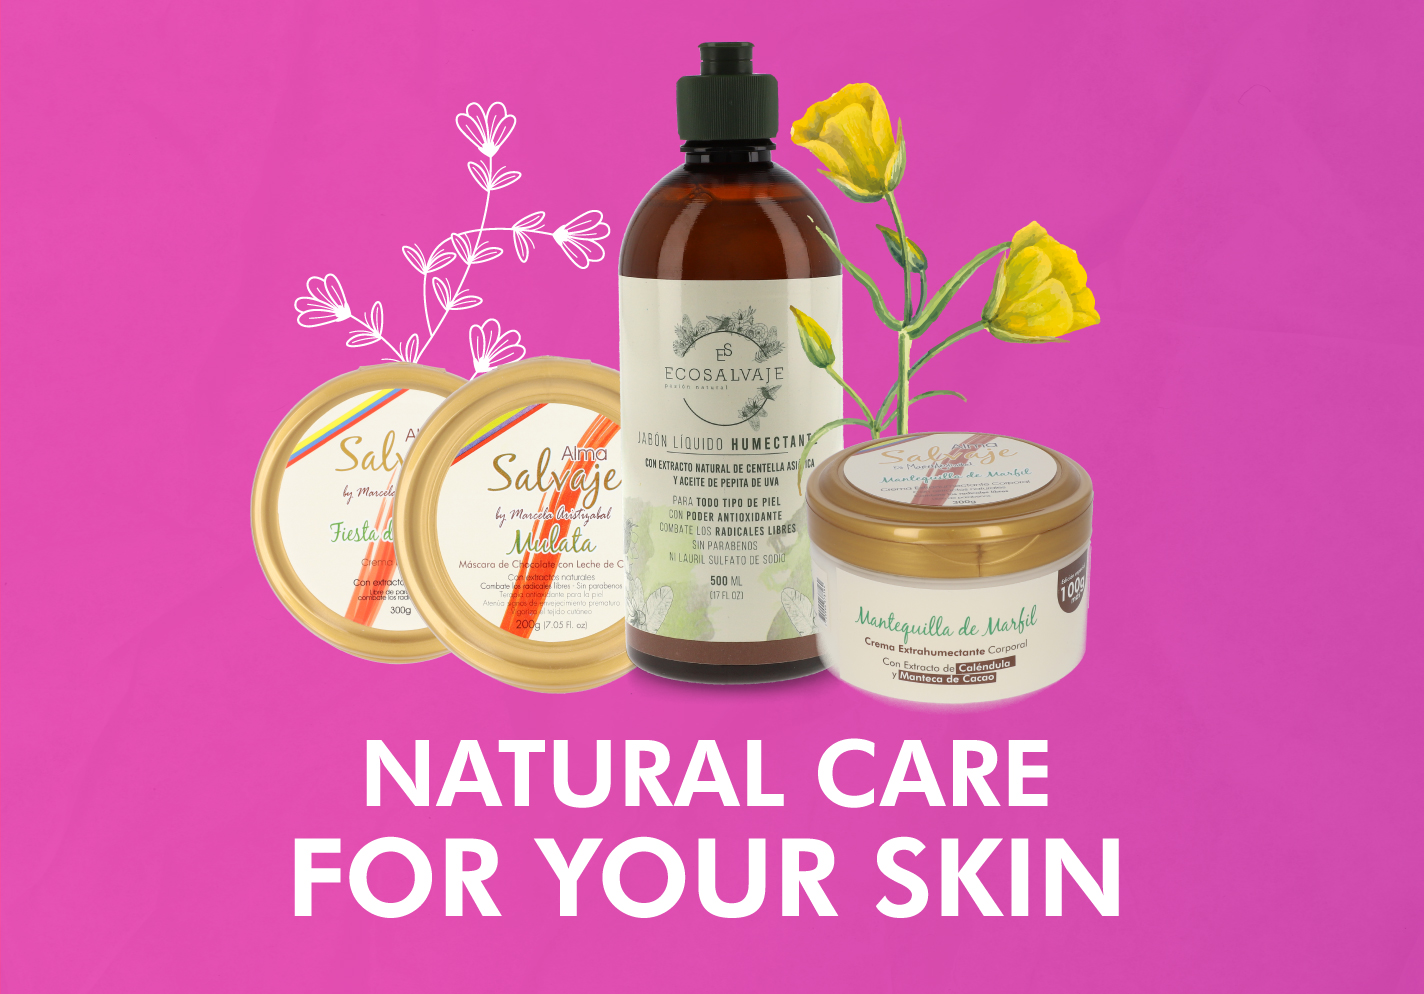 Natural care for your skin